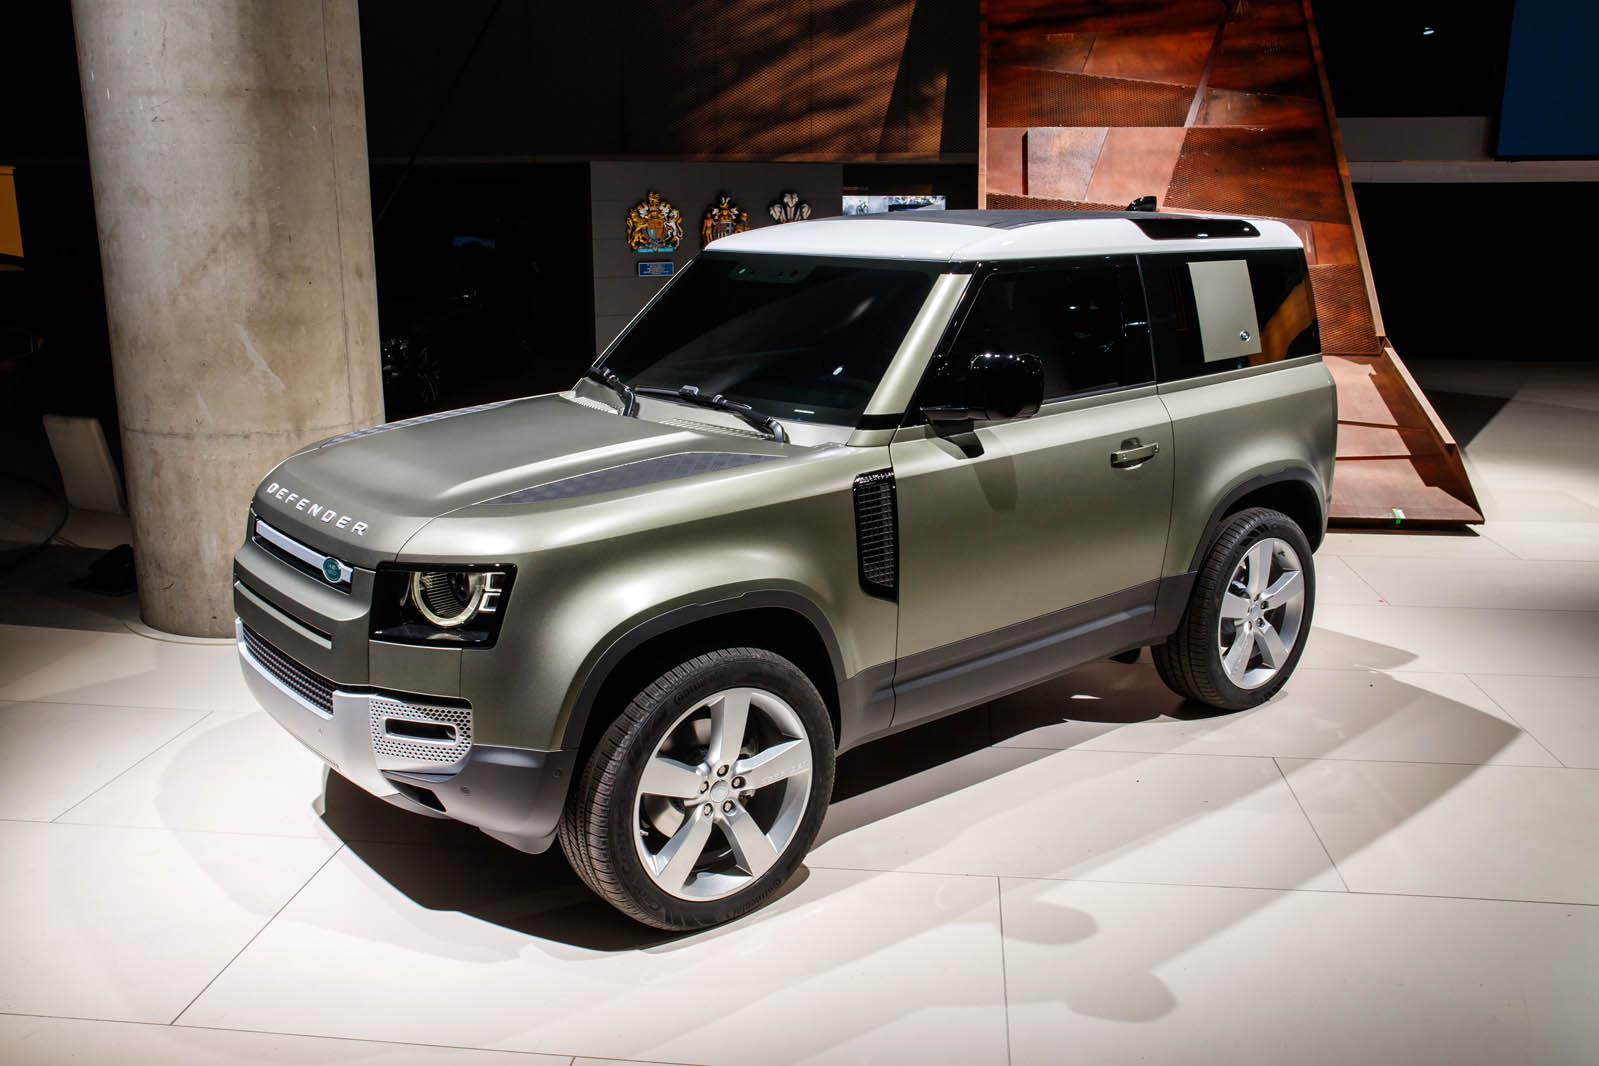 New Land Rover Defender 2020: Release date, pictures, specs & price